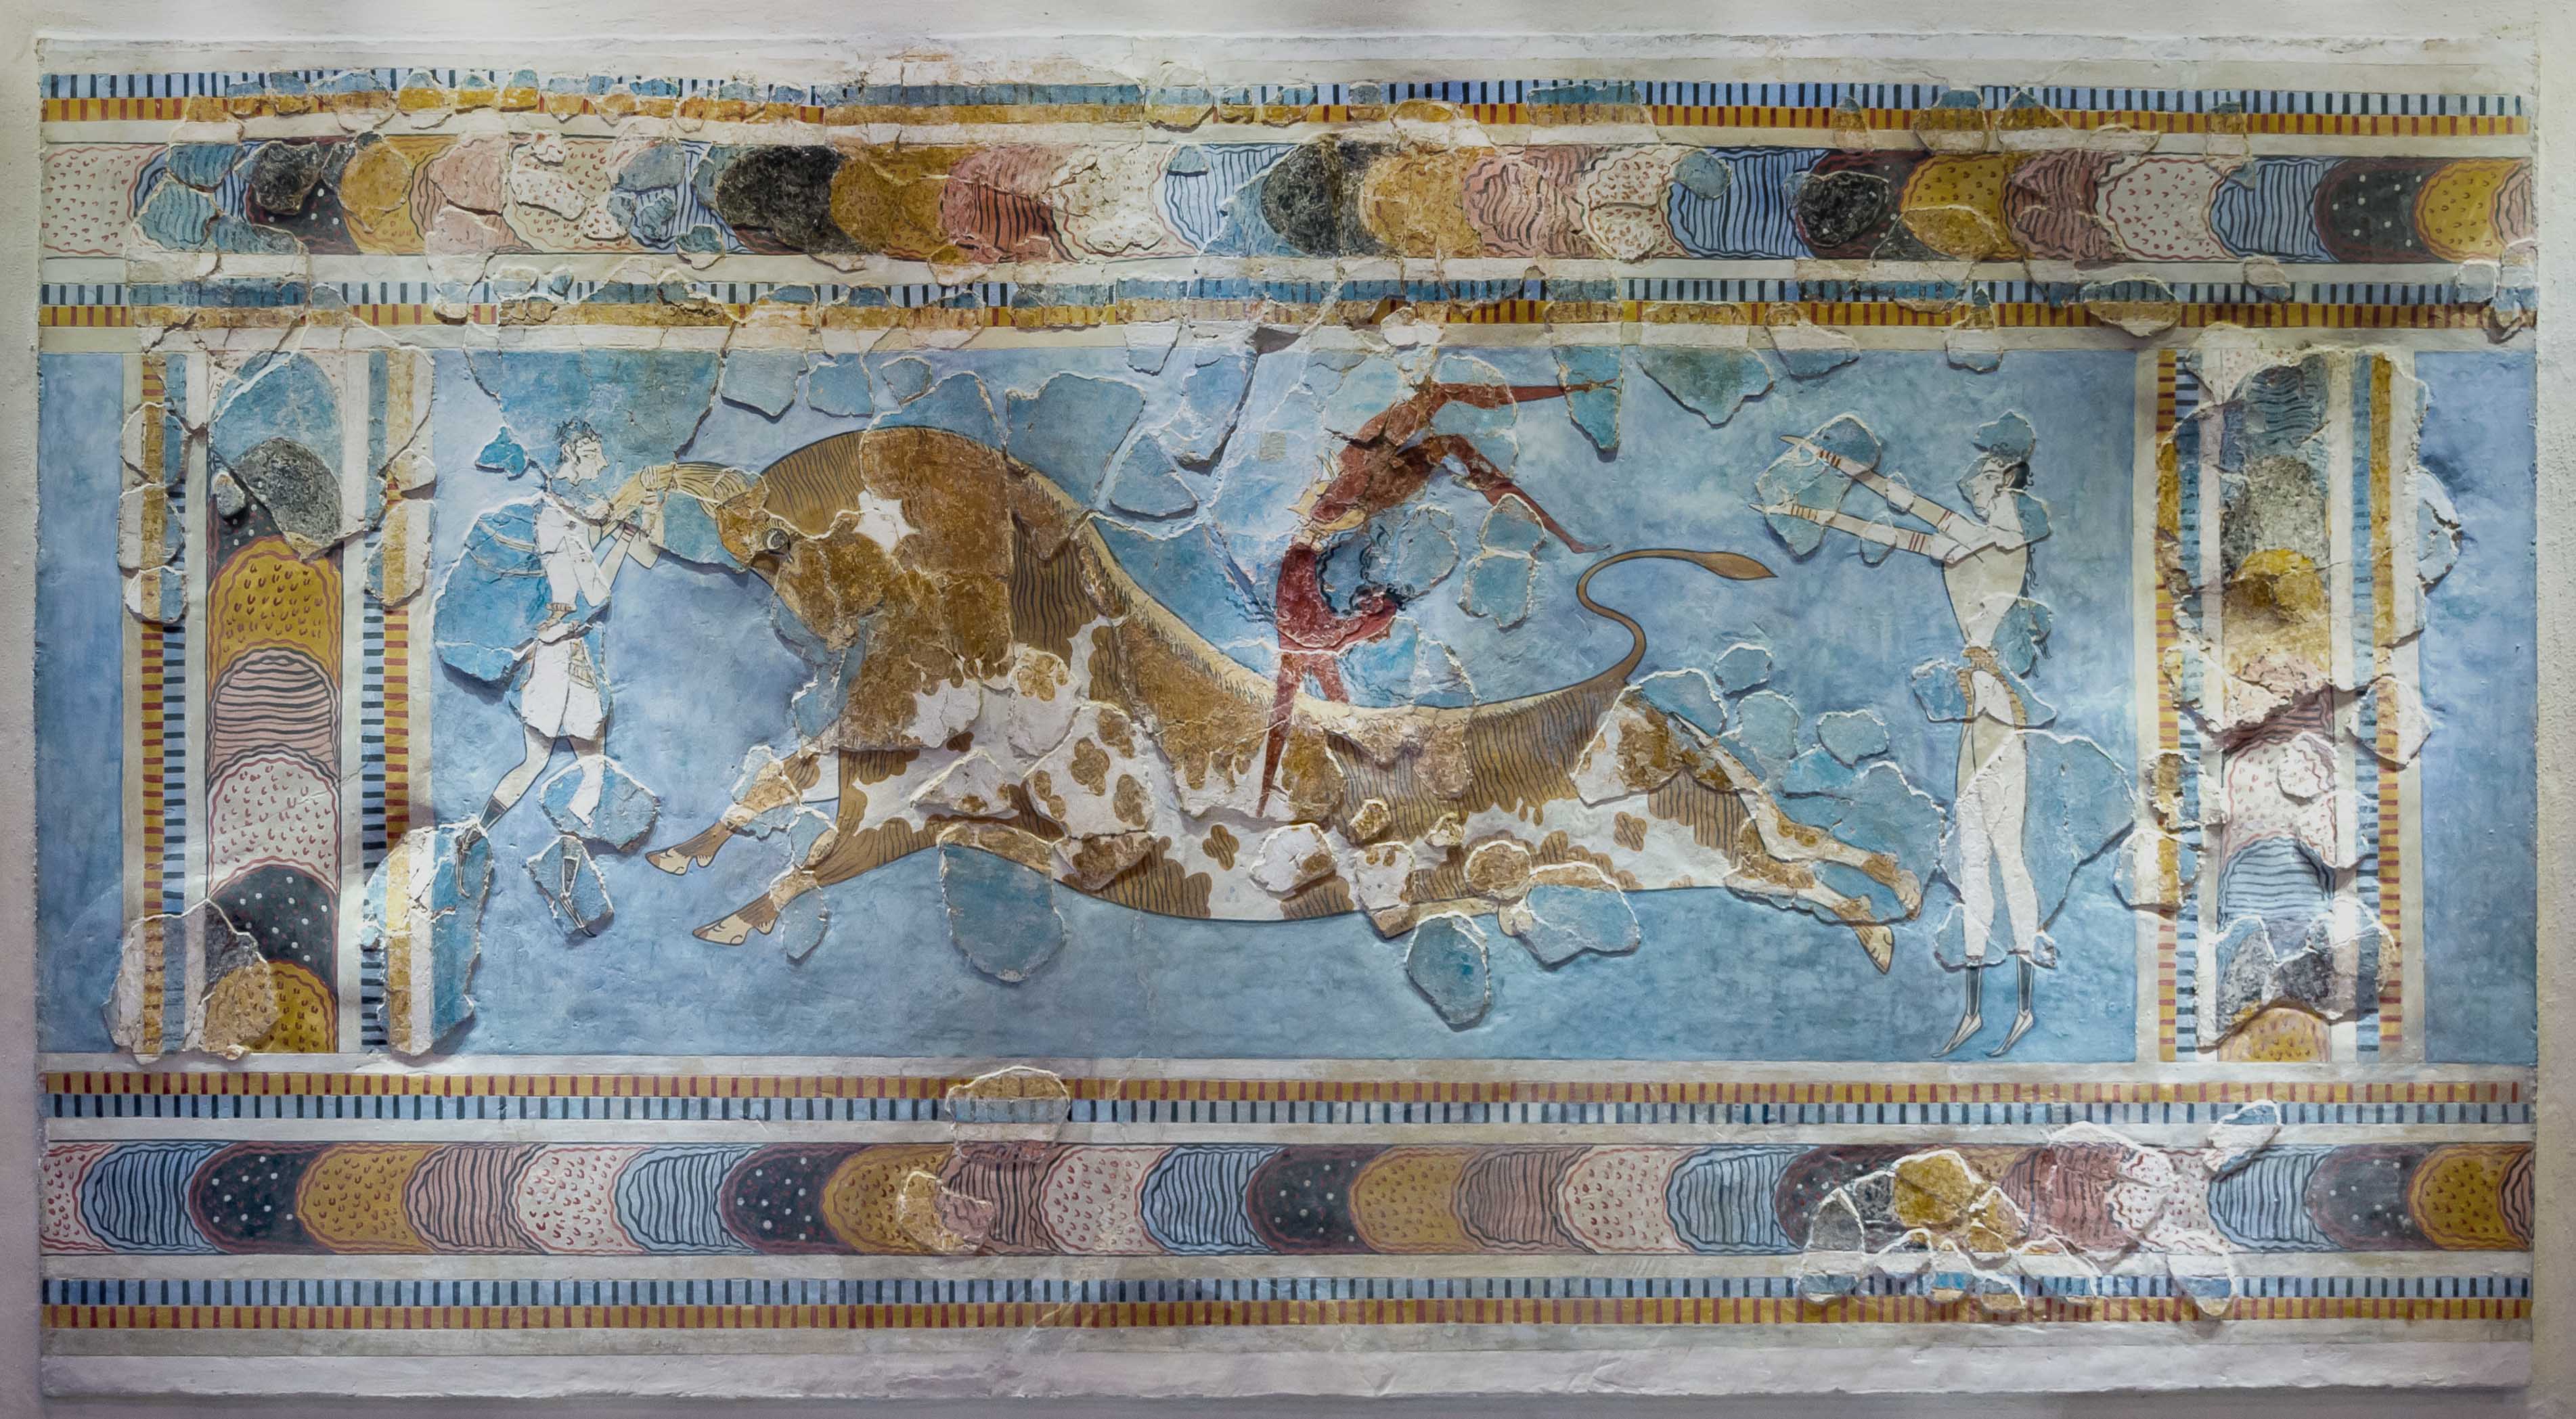 Bull-leaping fresco from the palace of Knossos